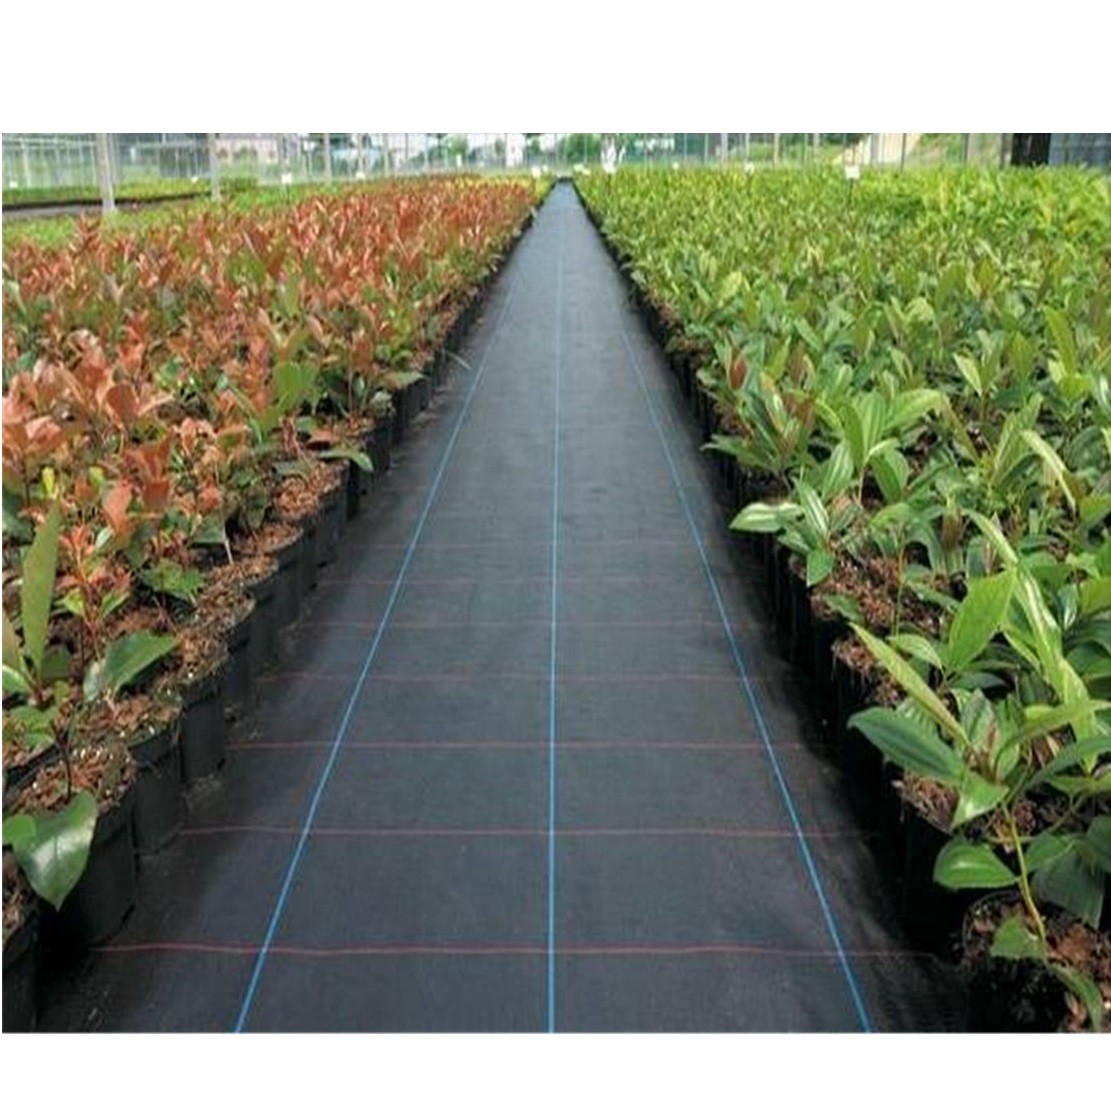 Factory Supply China High Quality Black PP Woven Weed Barrier/Weed Control Fabric